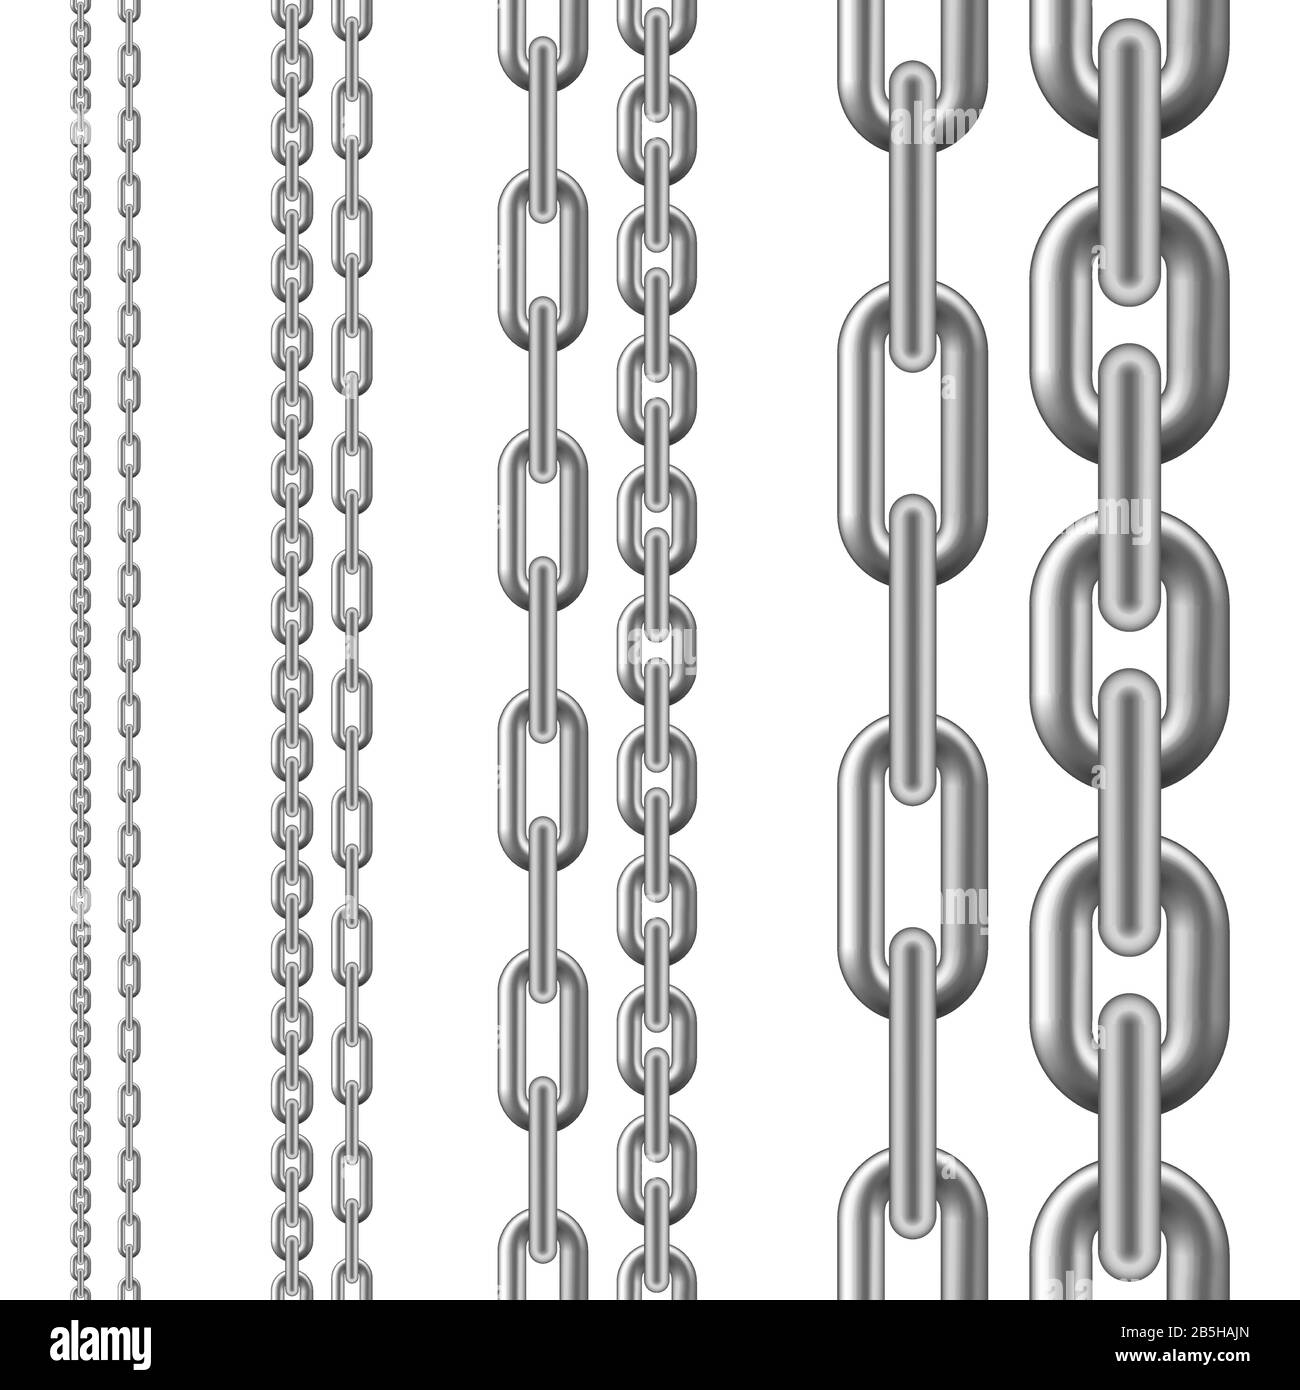 Set of metallic Chain. Seamless chain isolated on white background. Vector Stock Vector